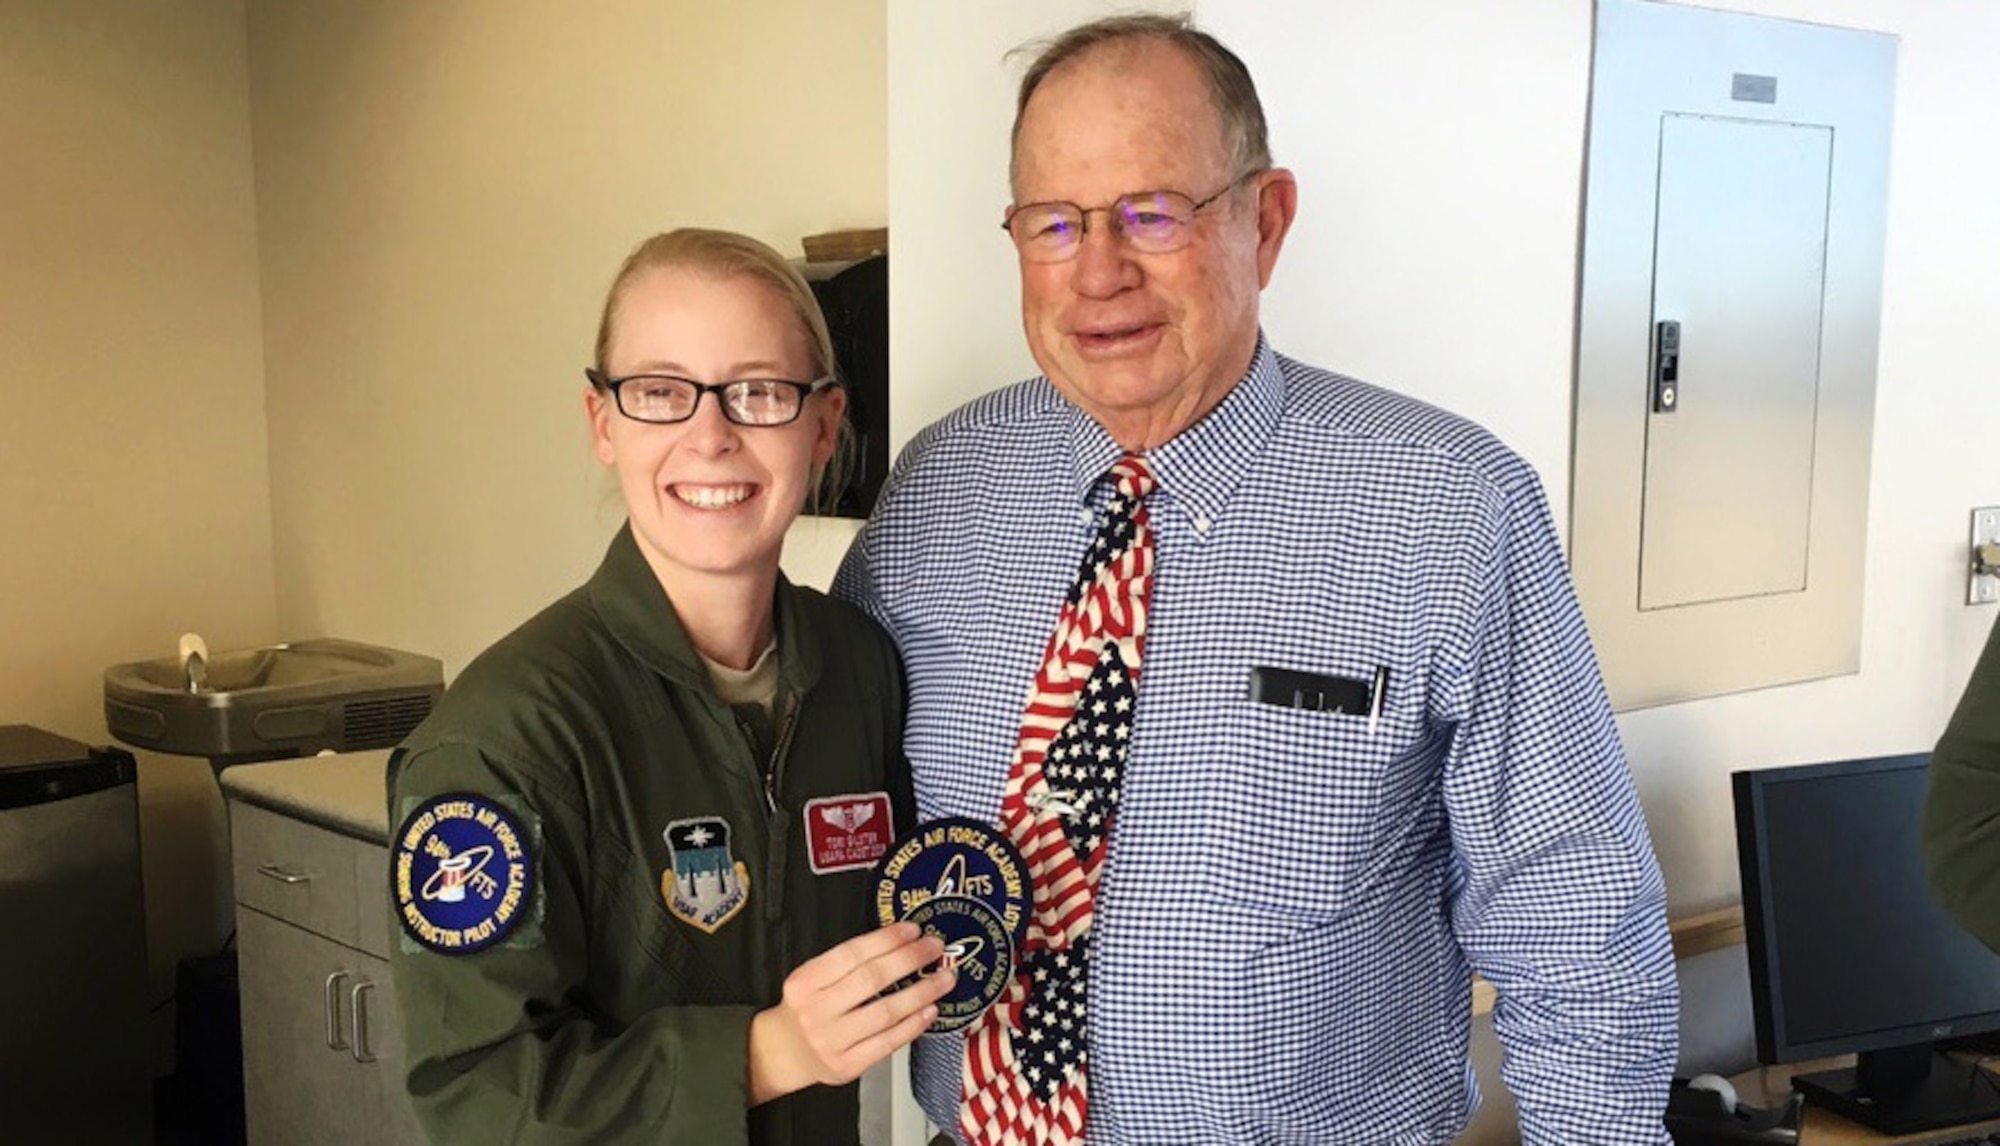 Cadet 2nd Class Tori Gilster and retired Lt. Col. Richard Trail, a graduate of the U.S. Air Force Academy, pose for a photo last fall in the 94th Flying Training Squadron offices. Trail was the first cadet to make a successful solo flight in a glider. He and retired Lt. Col. James Leland visited the Academy to meet cadets and staff and discuss the advances made in the wake of the Air Force's only Soaring Program. Leland helped design the Soaring Program in the 1960s.'(Courtesy photo)  